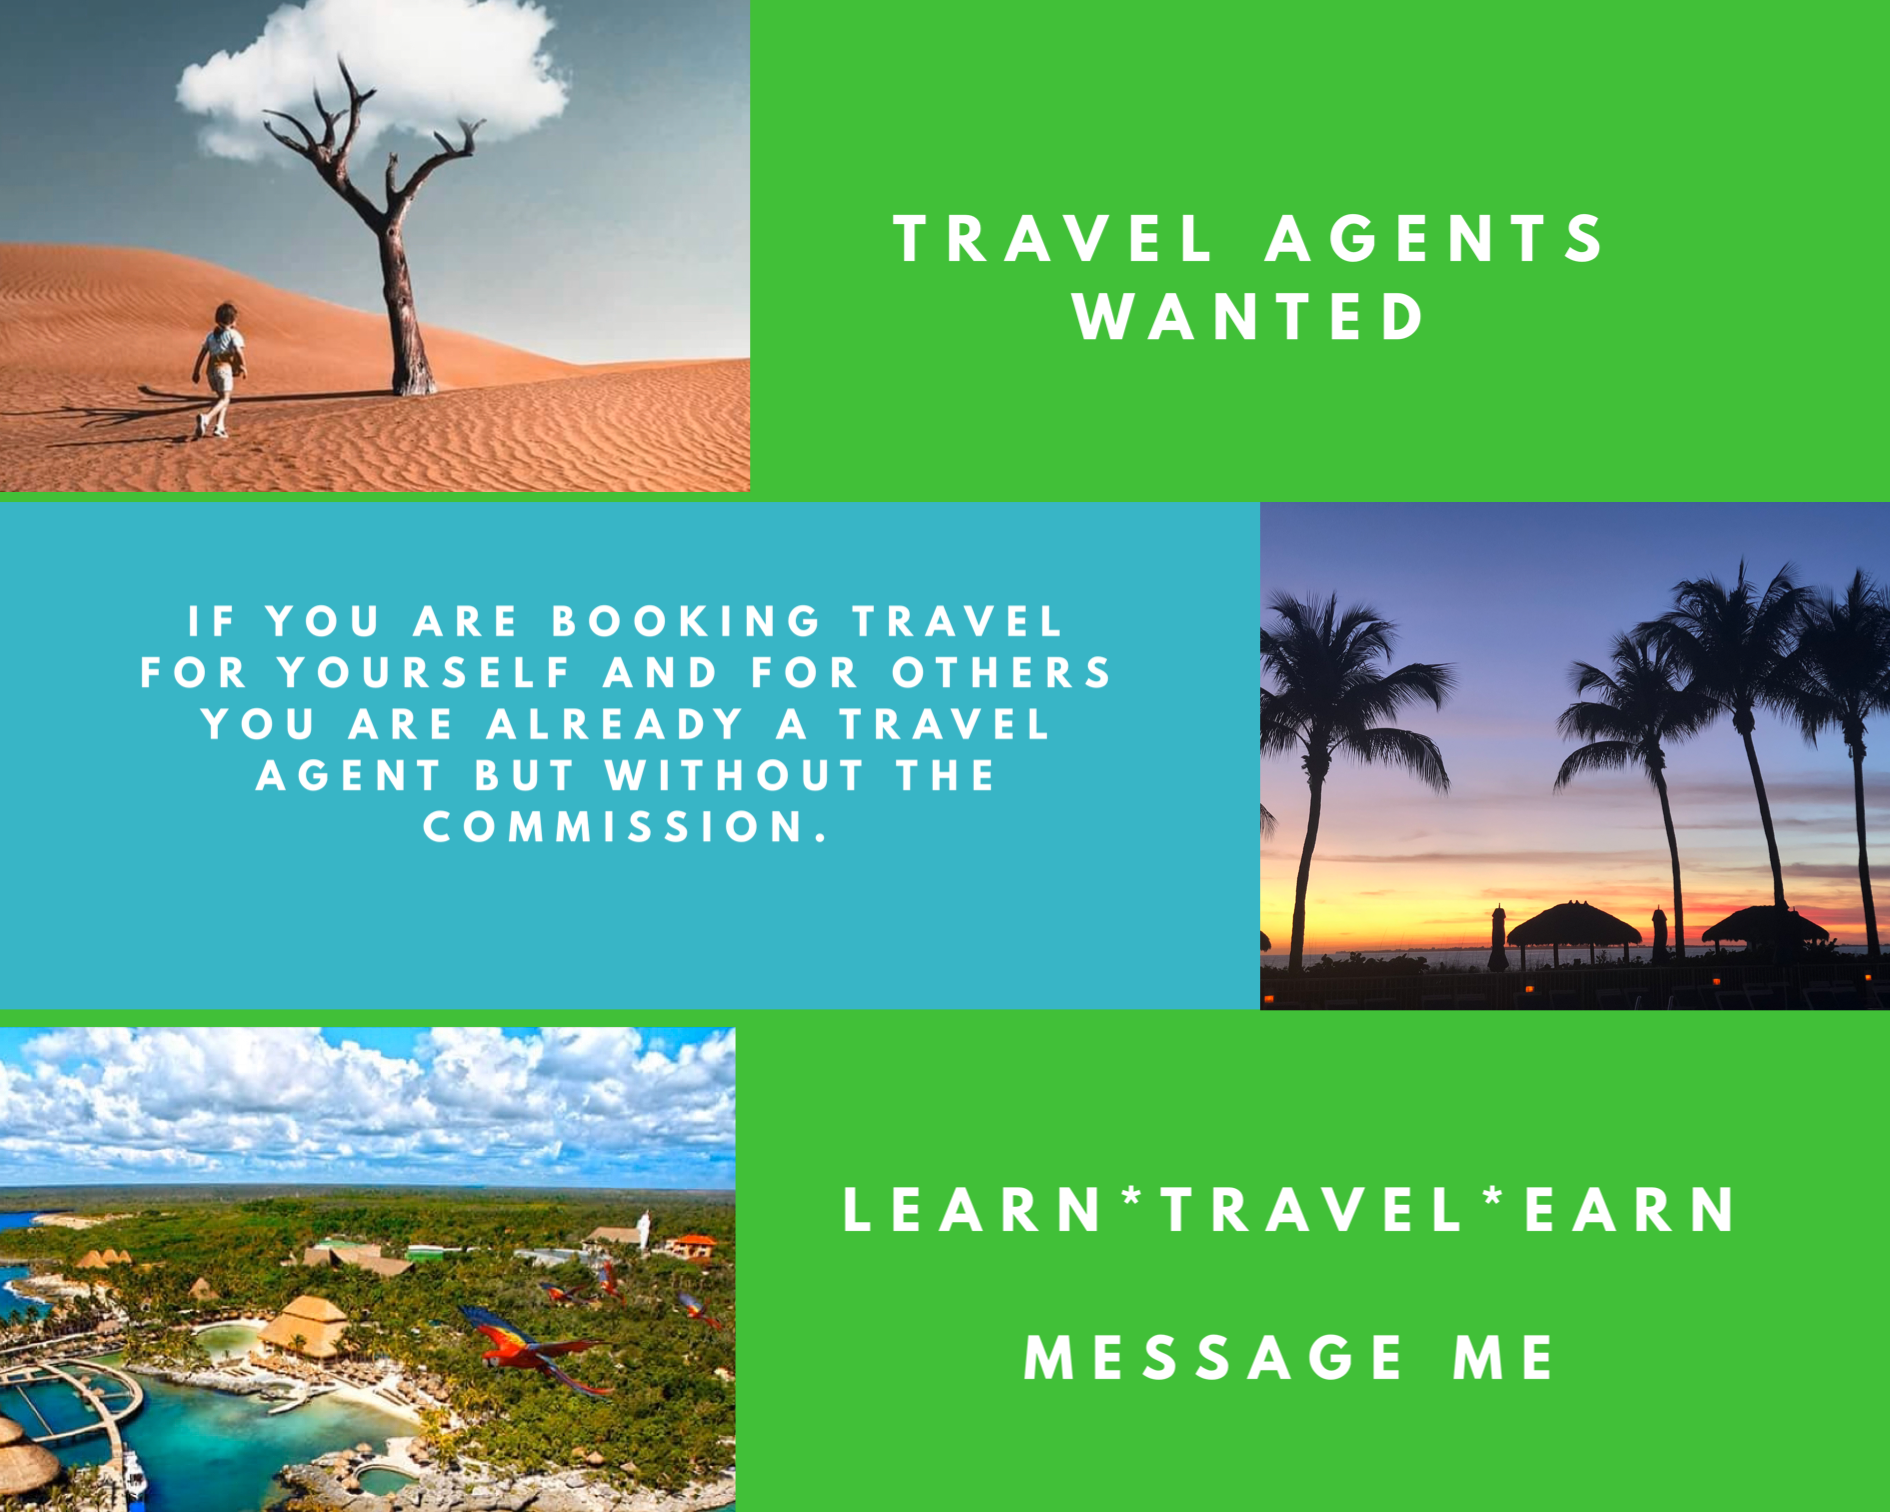 travel agents wanted images